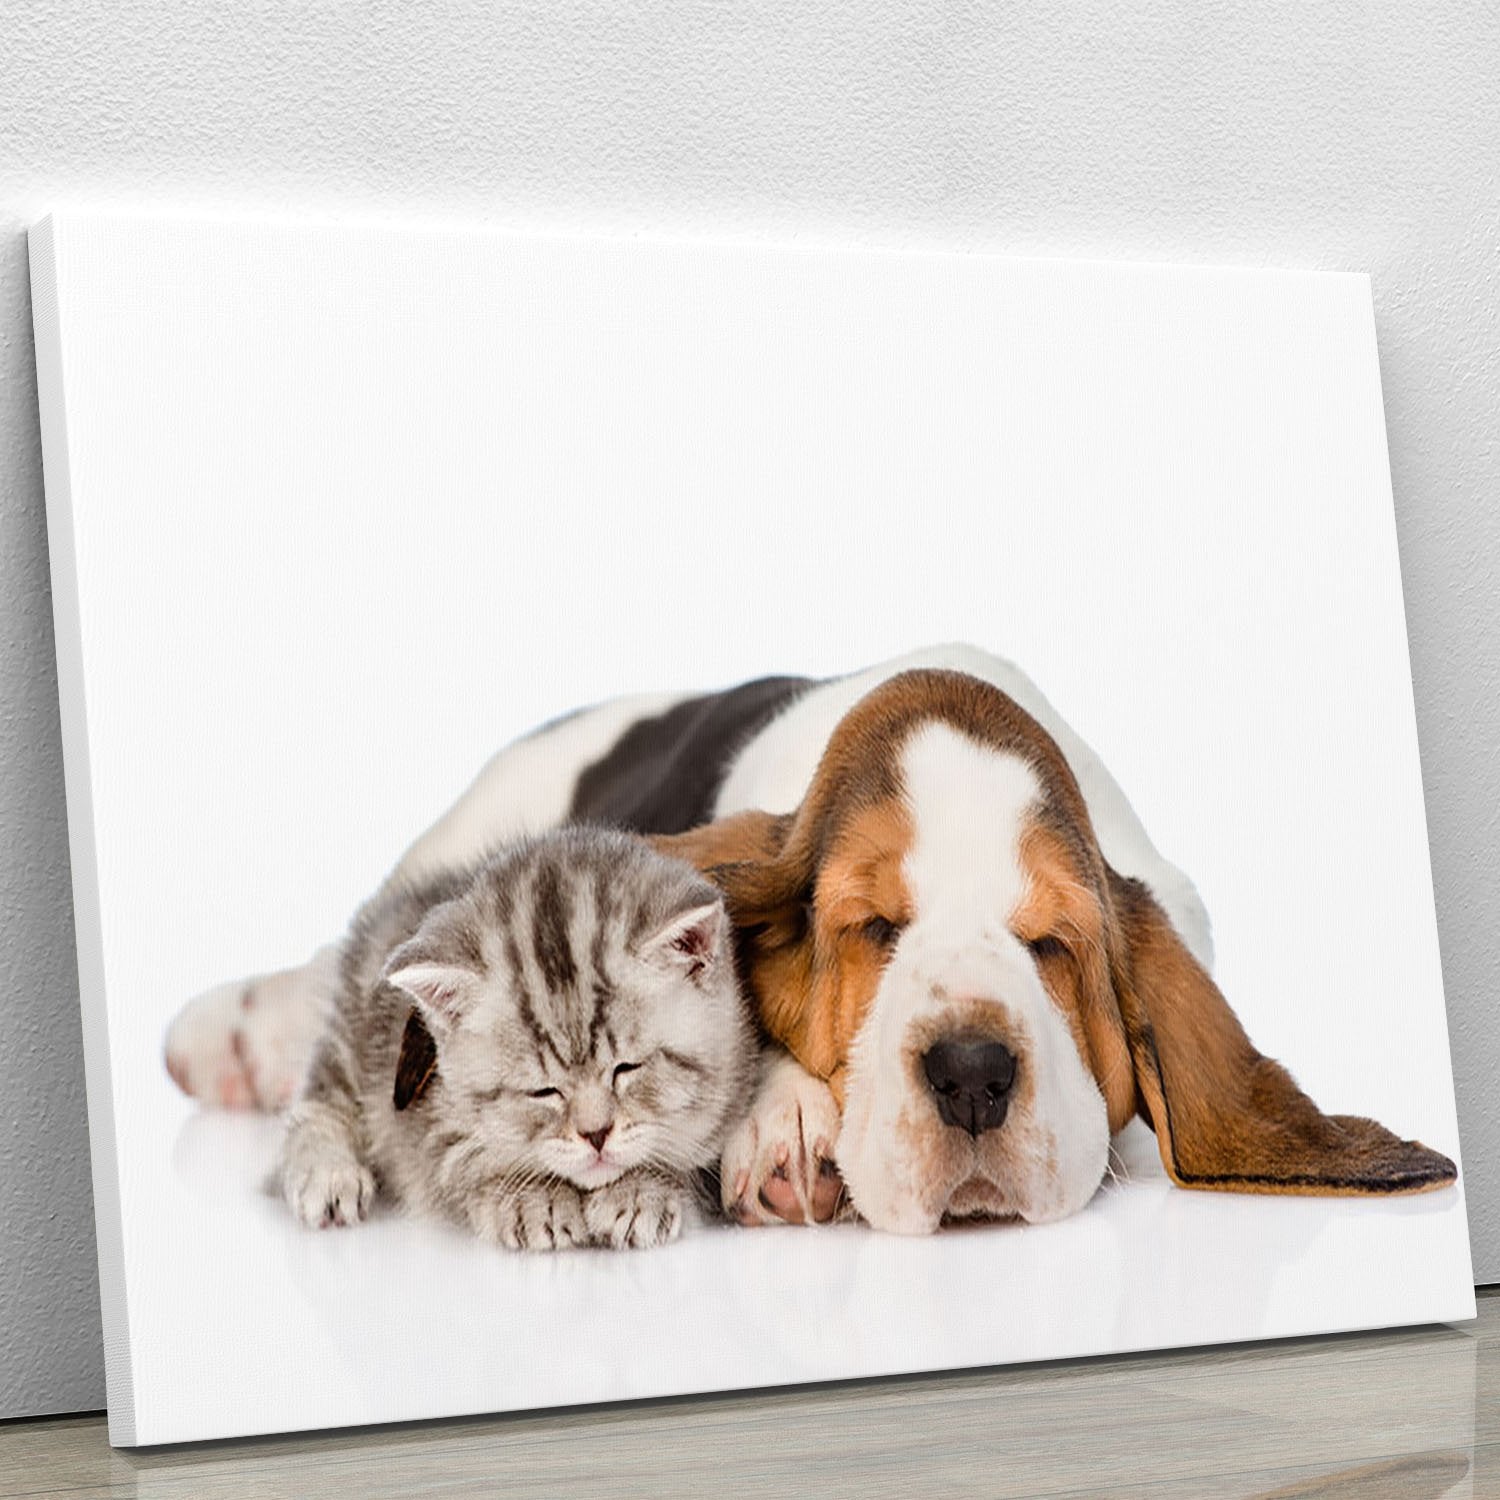 Kitten and puppy sleeping together. isolated on white background Canvas Print or Poster